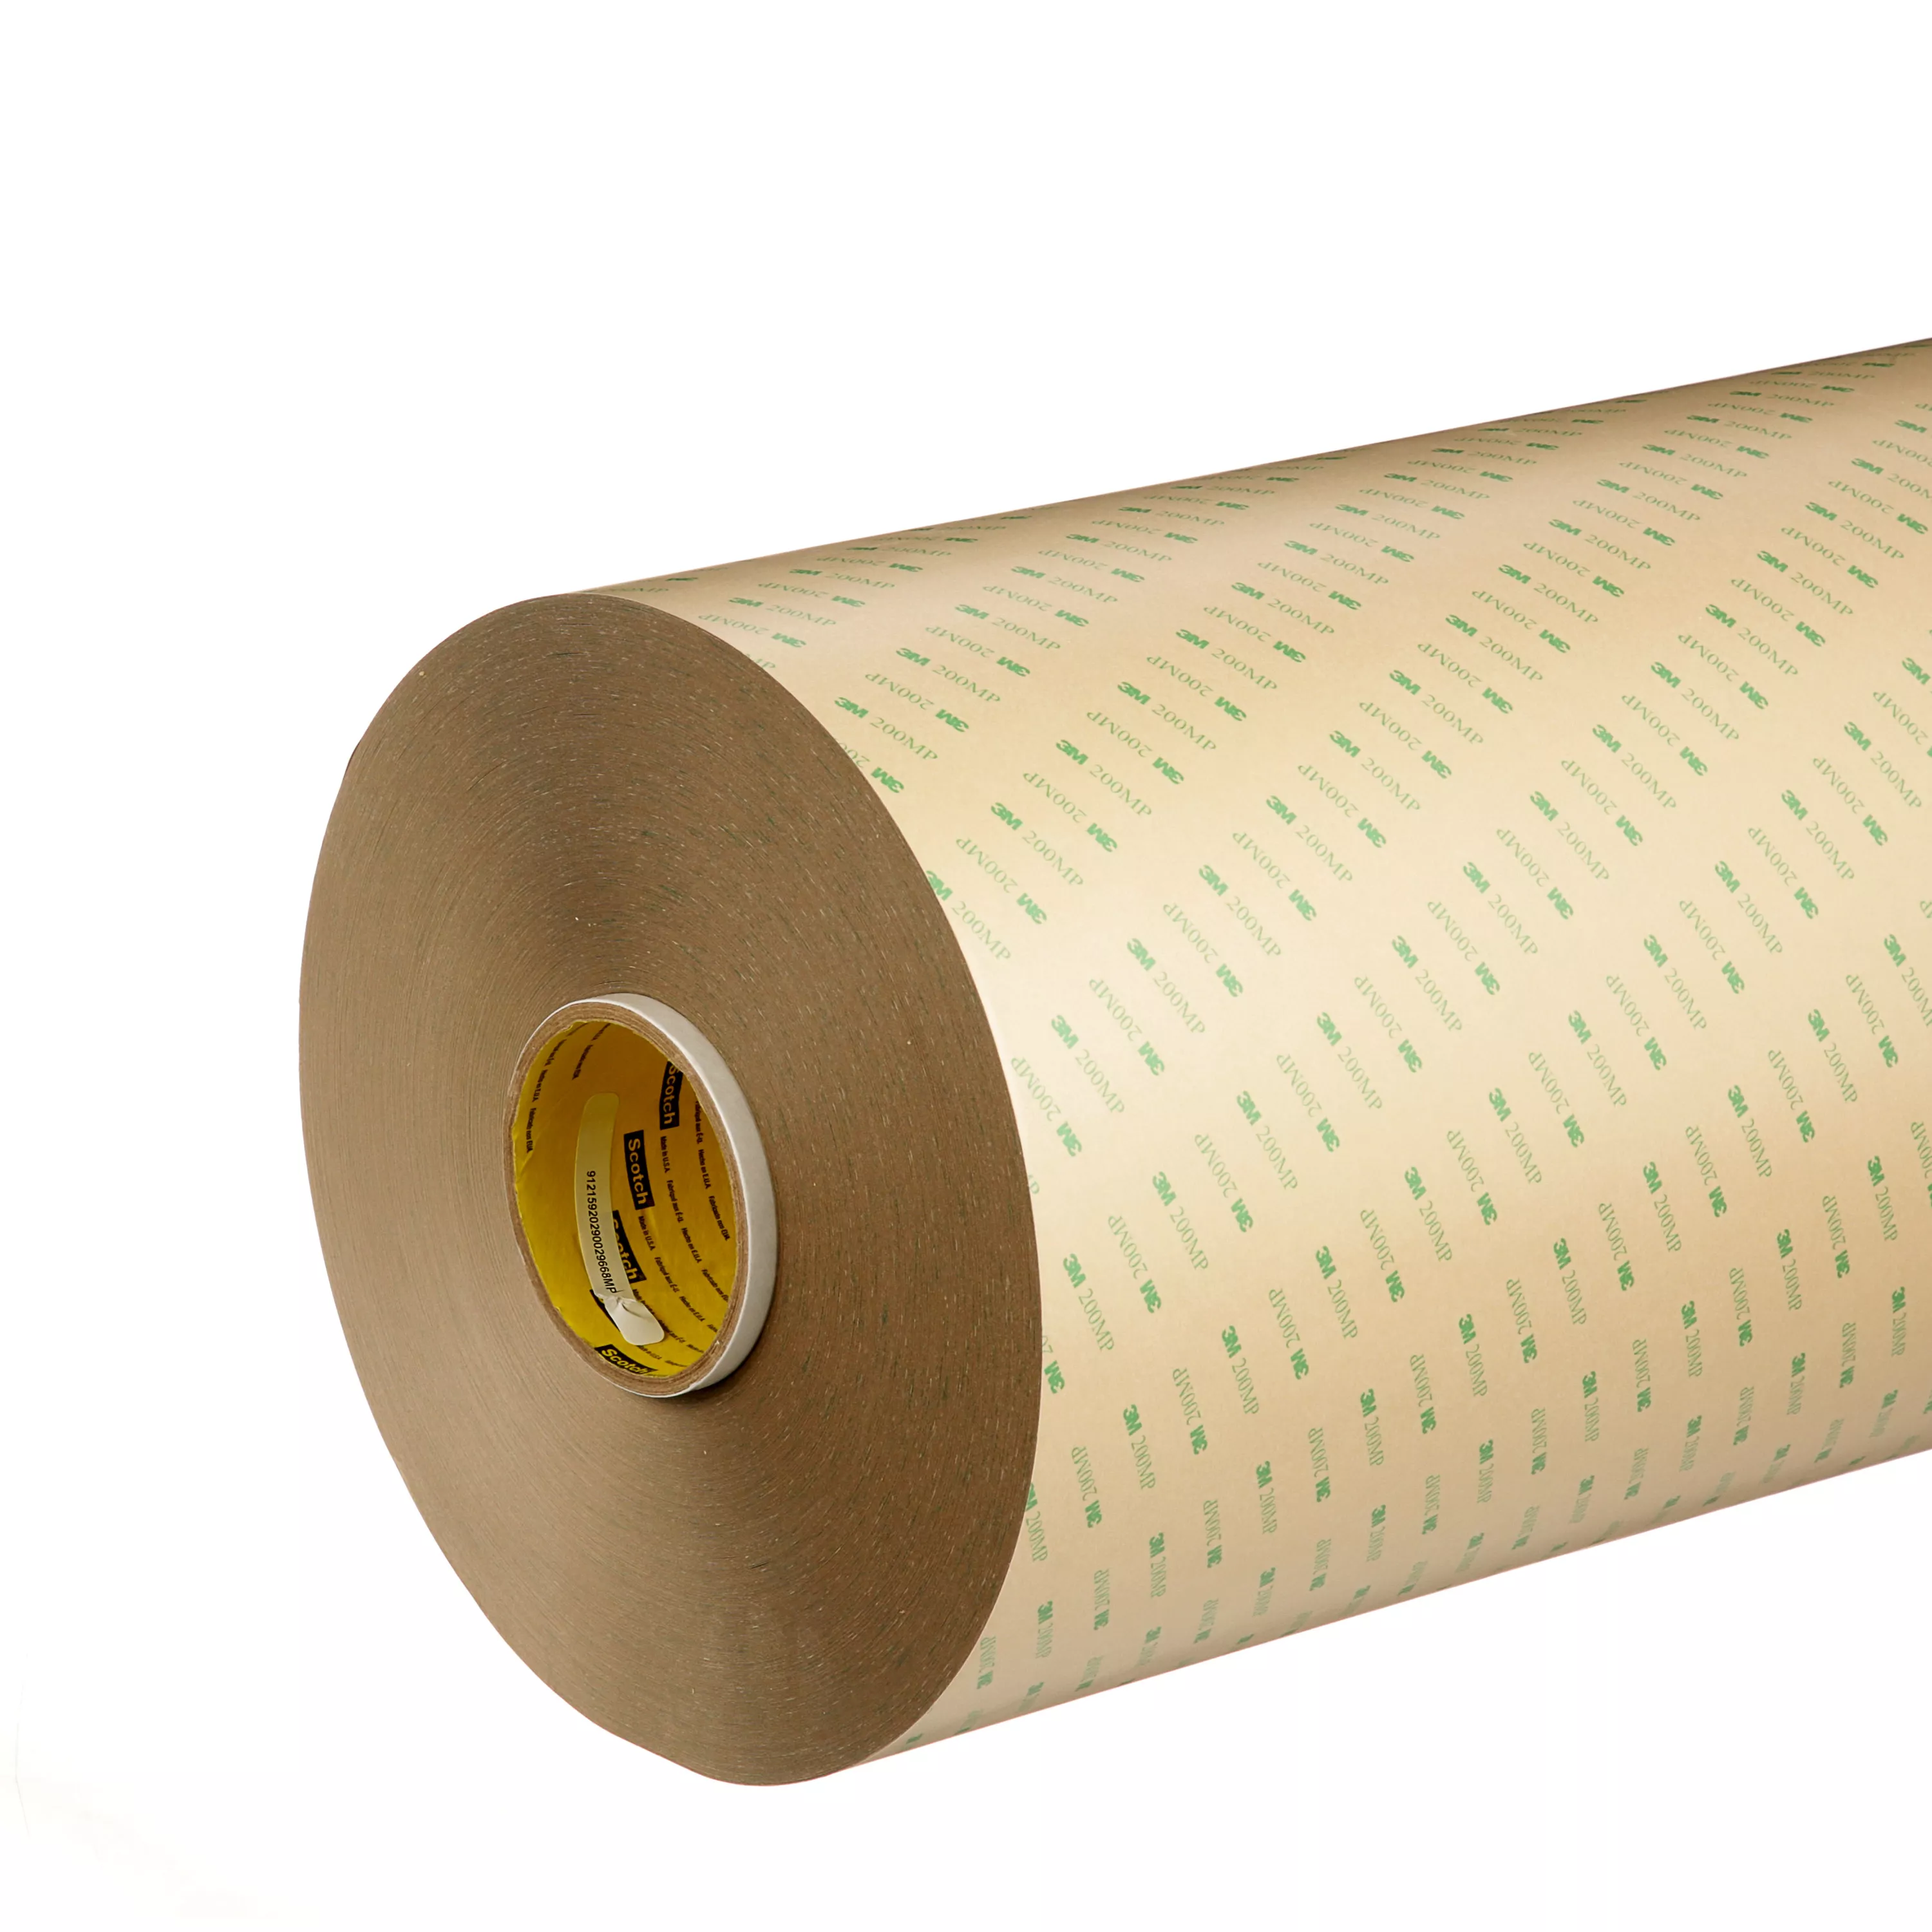 3M™ Adhesive Transfer Tape 966, Clear, 24 in x 60 yd, 2.3 mil, 1
Roll/Case